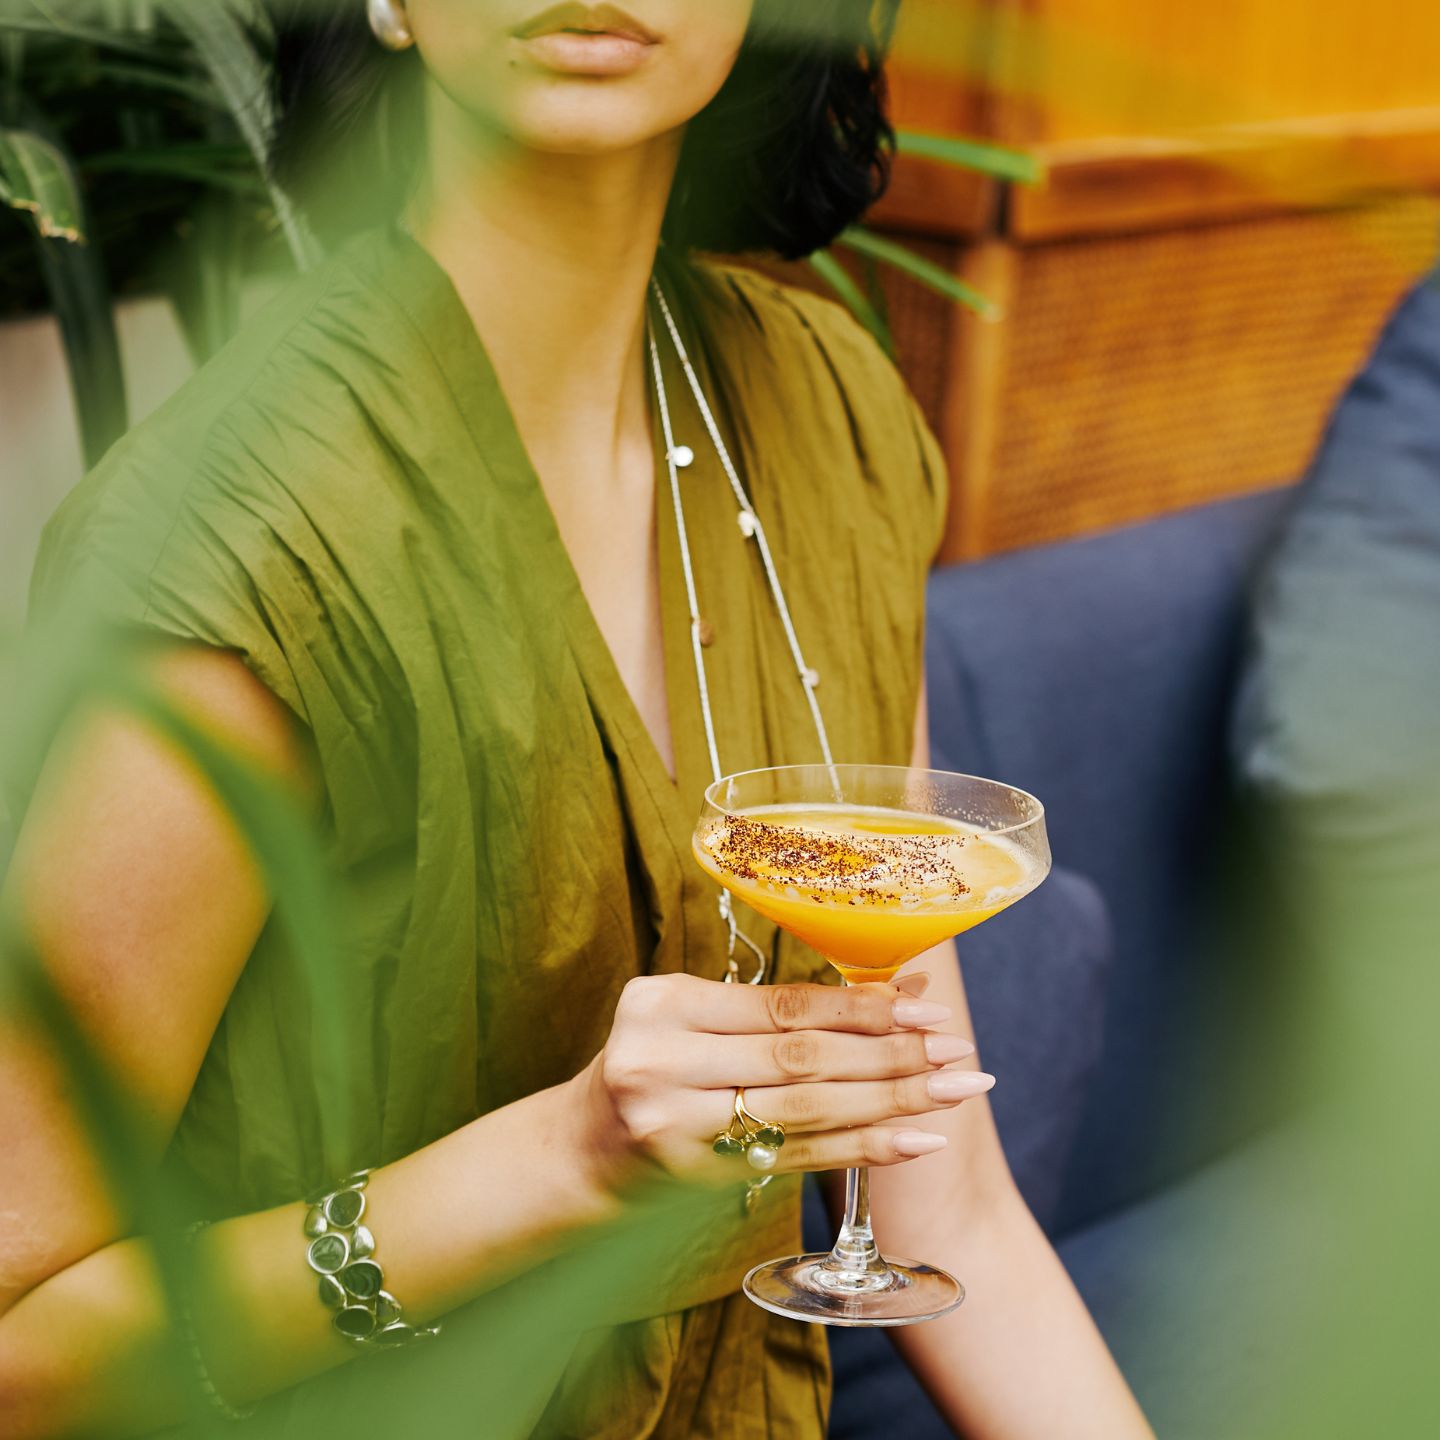 Woman in green top holds an orange cocktail in a coupe glass with greenery surrounding her